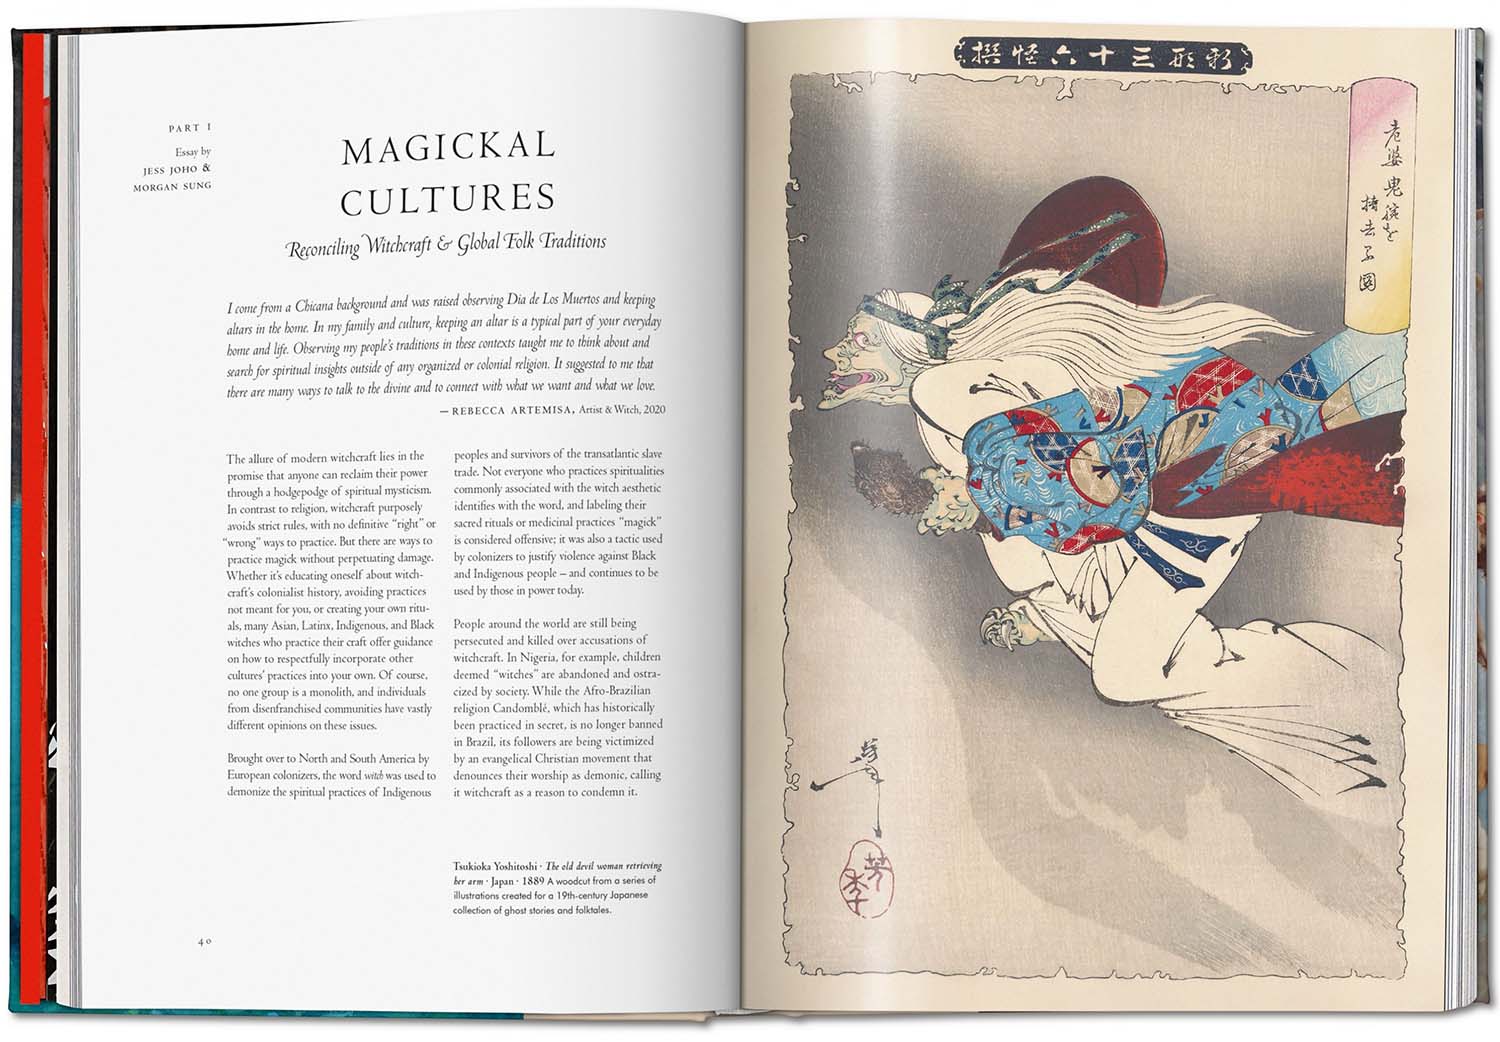 Witchcraft. The Library of Esoterica Published by Taschen